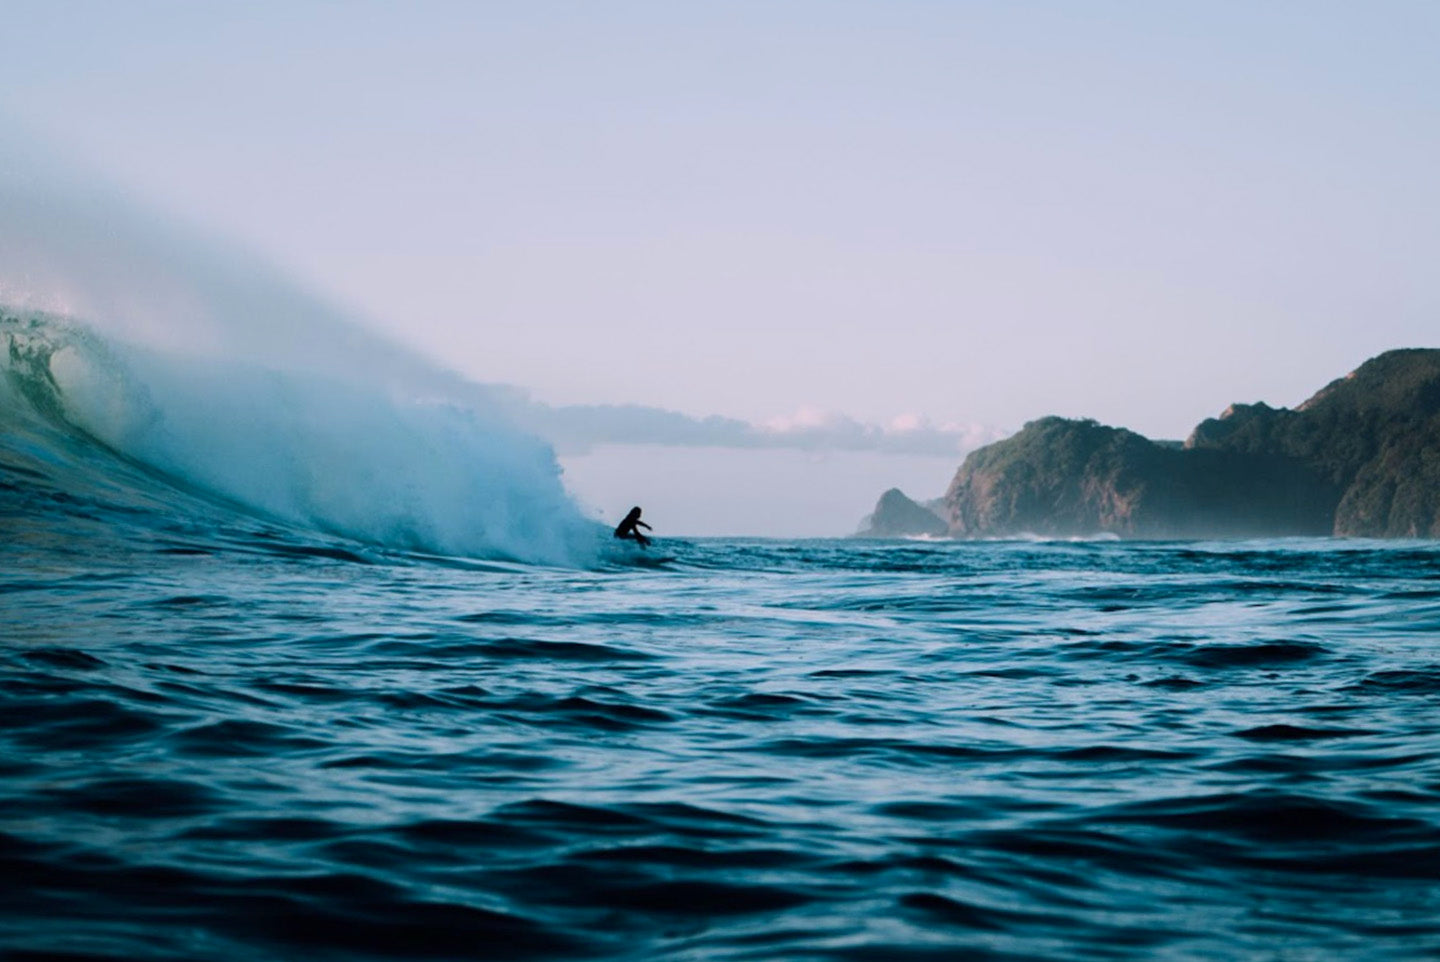 Surfer riding a wave in the ocean, with sea cliffs in the background. The surfer is the only person in the water.